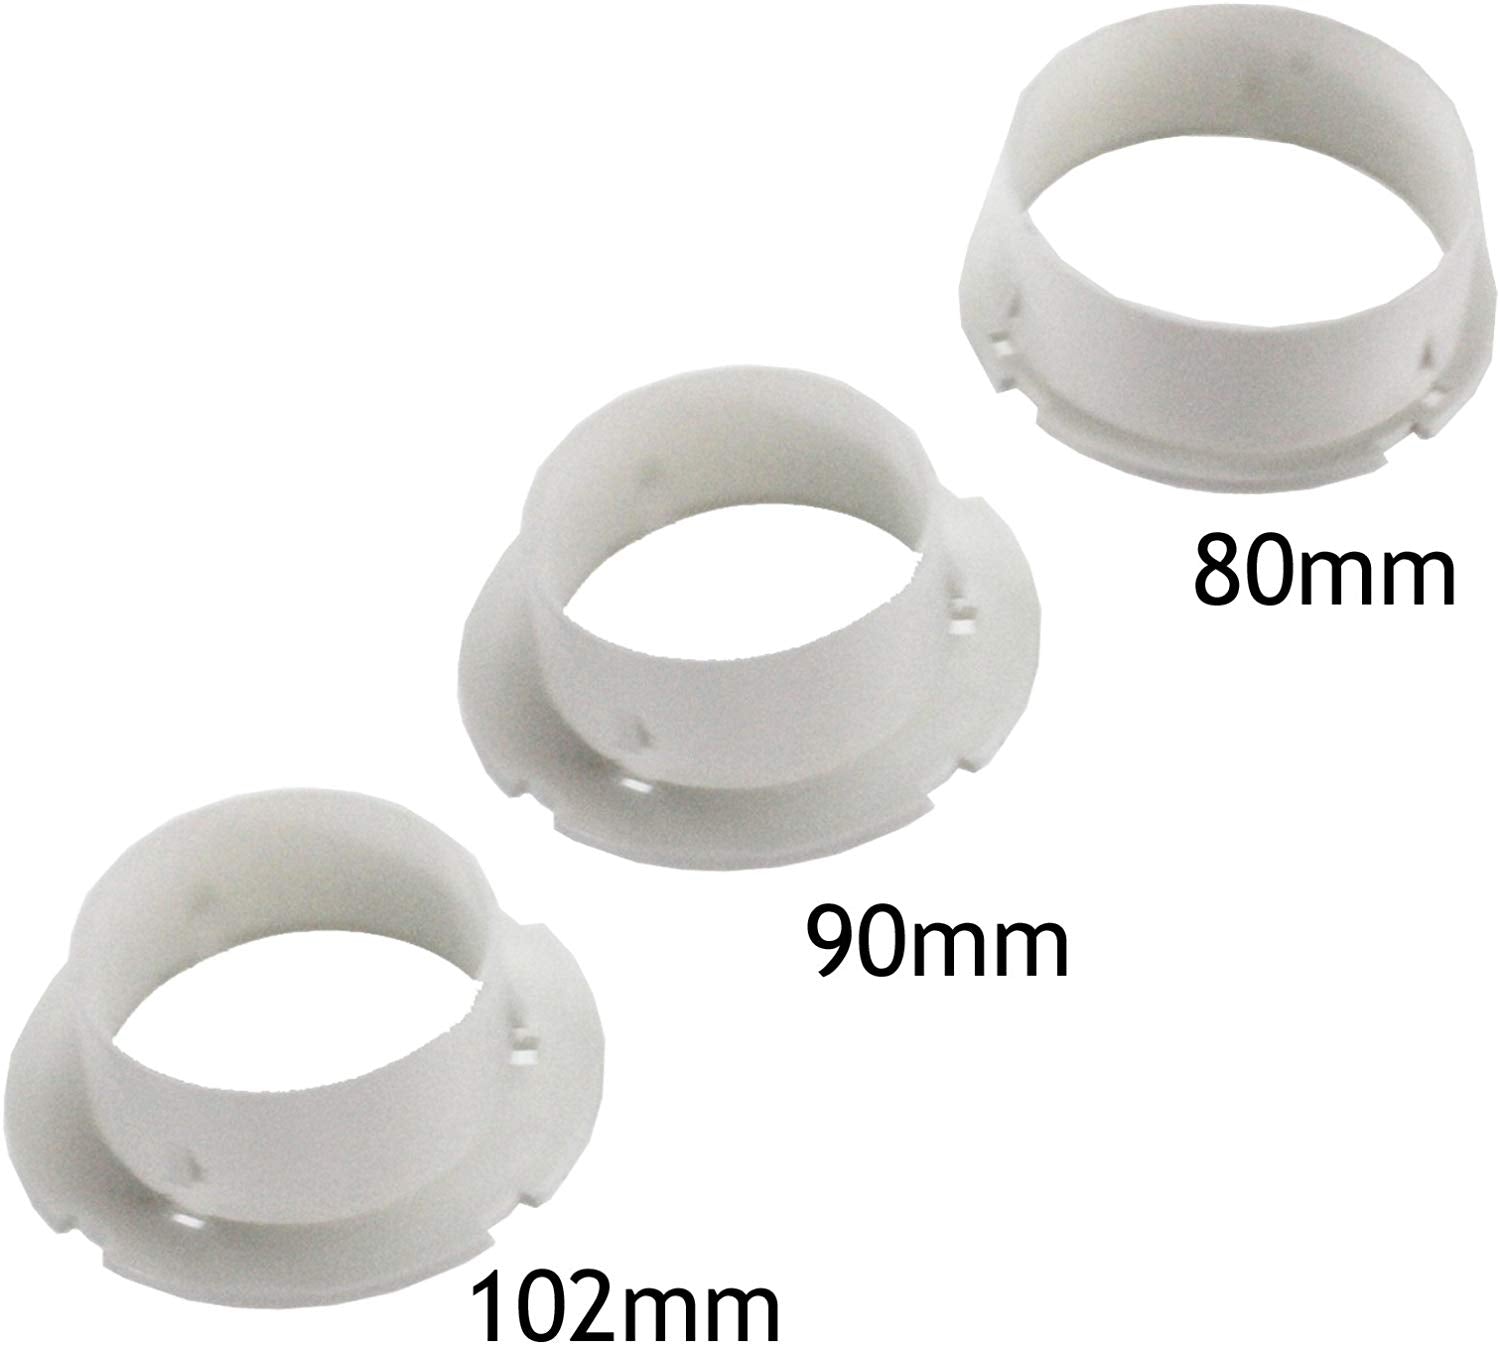 Vent Hose Condenser Kit with 3 x Adapters for Crusader Tumble Dryer (1.2m)